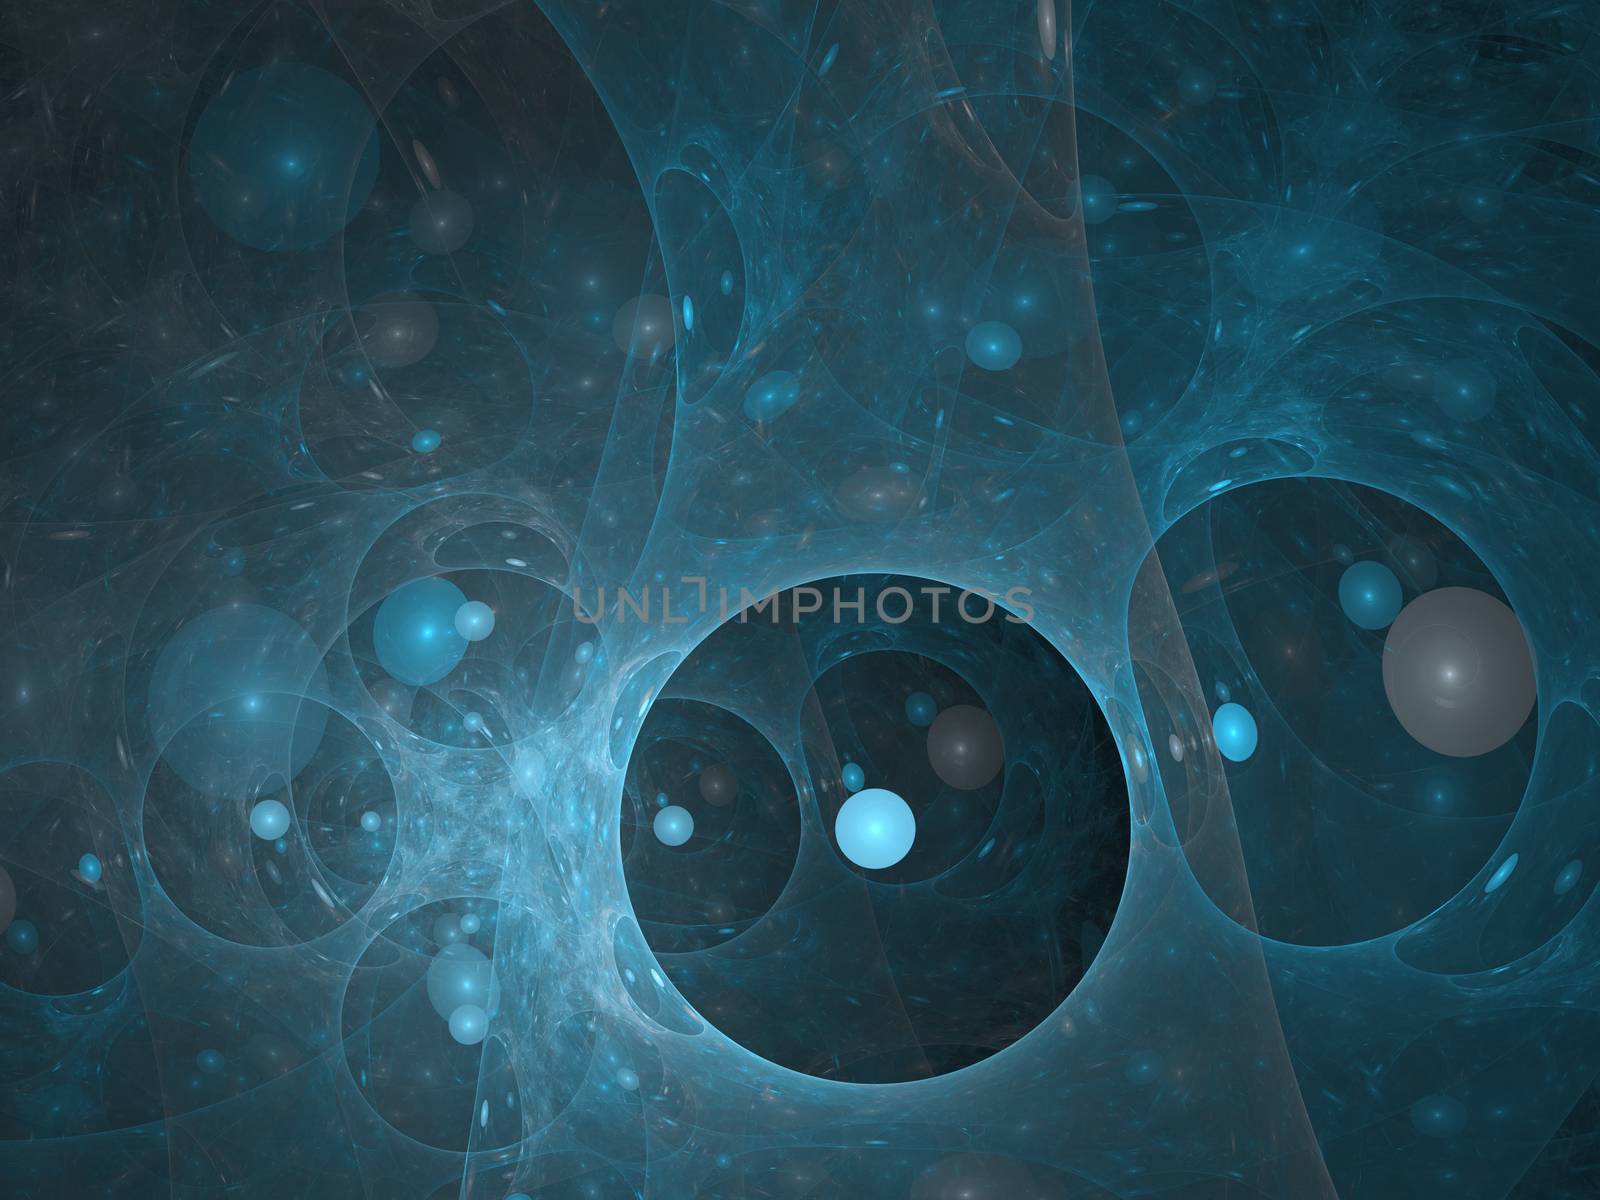 Perfect abstract digital blue background. Composition of bubbles and circles and fractal elements with metaphorical relationship to space, science and modern technology. by NatalyArt